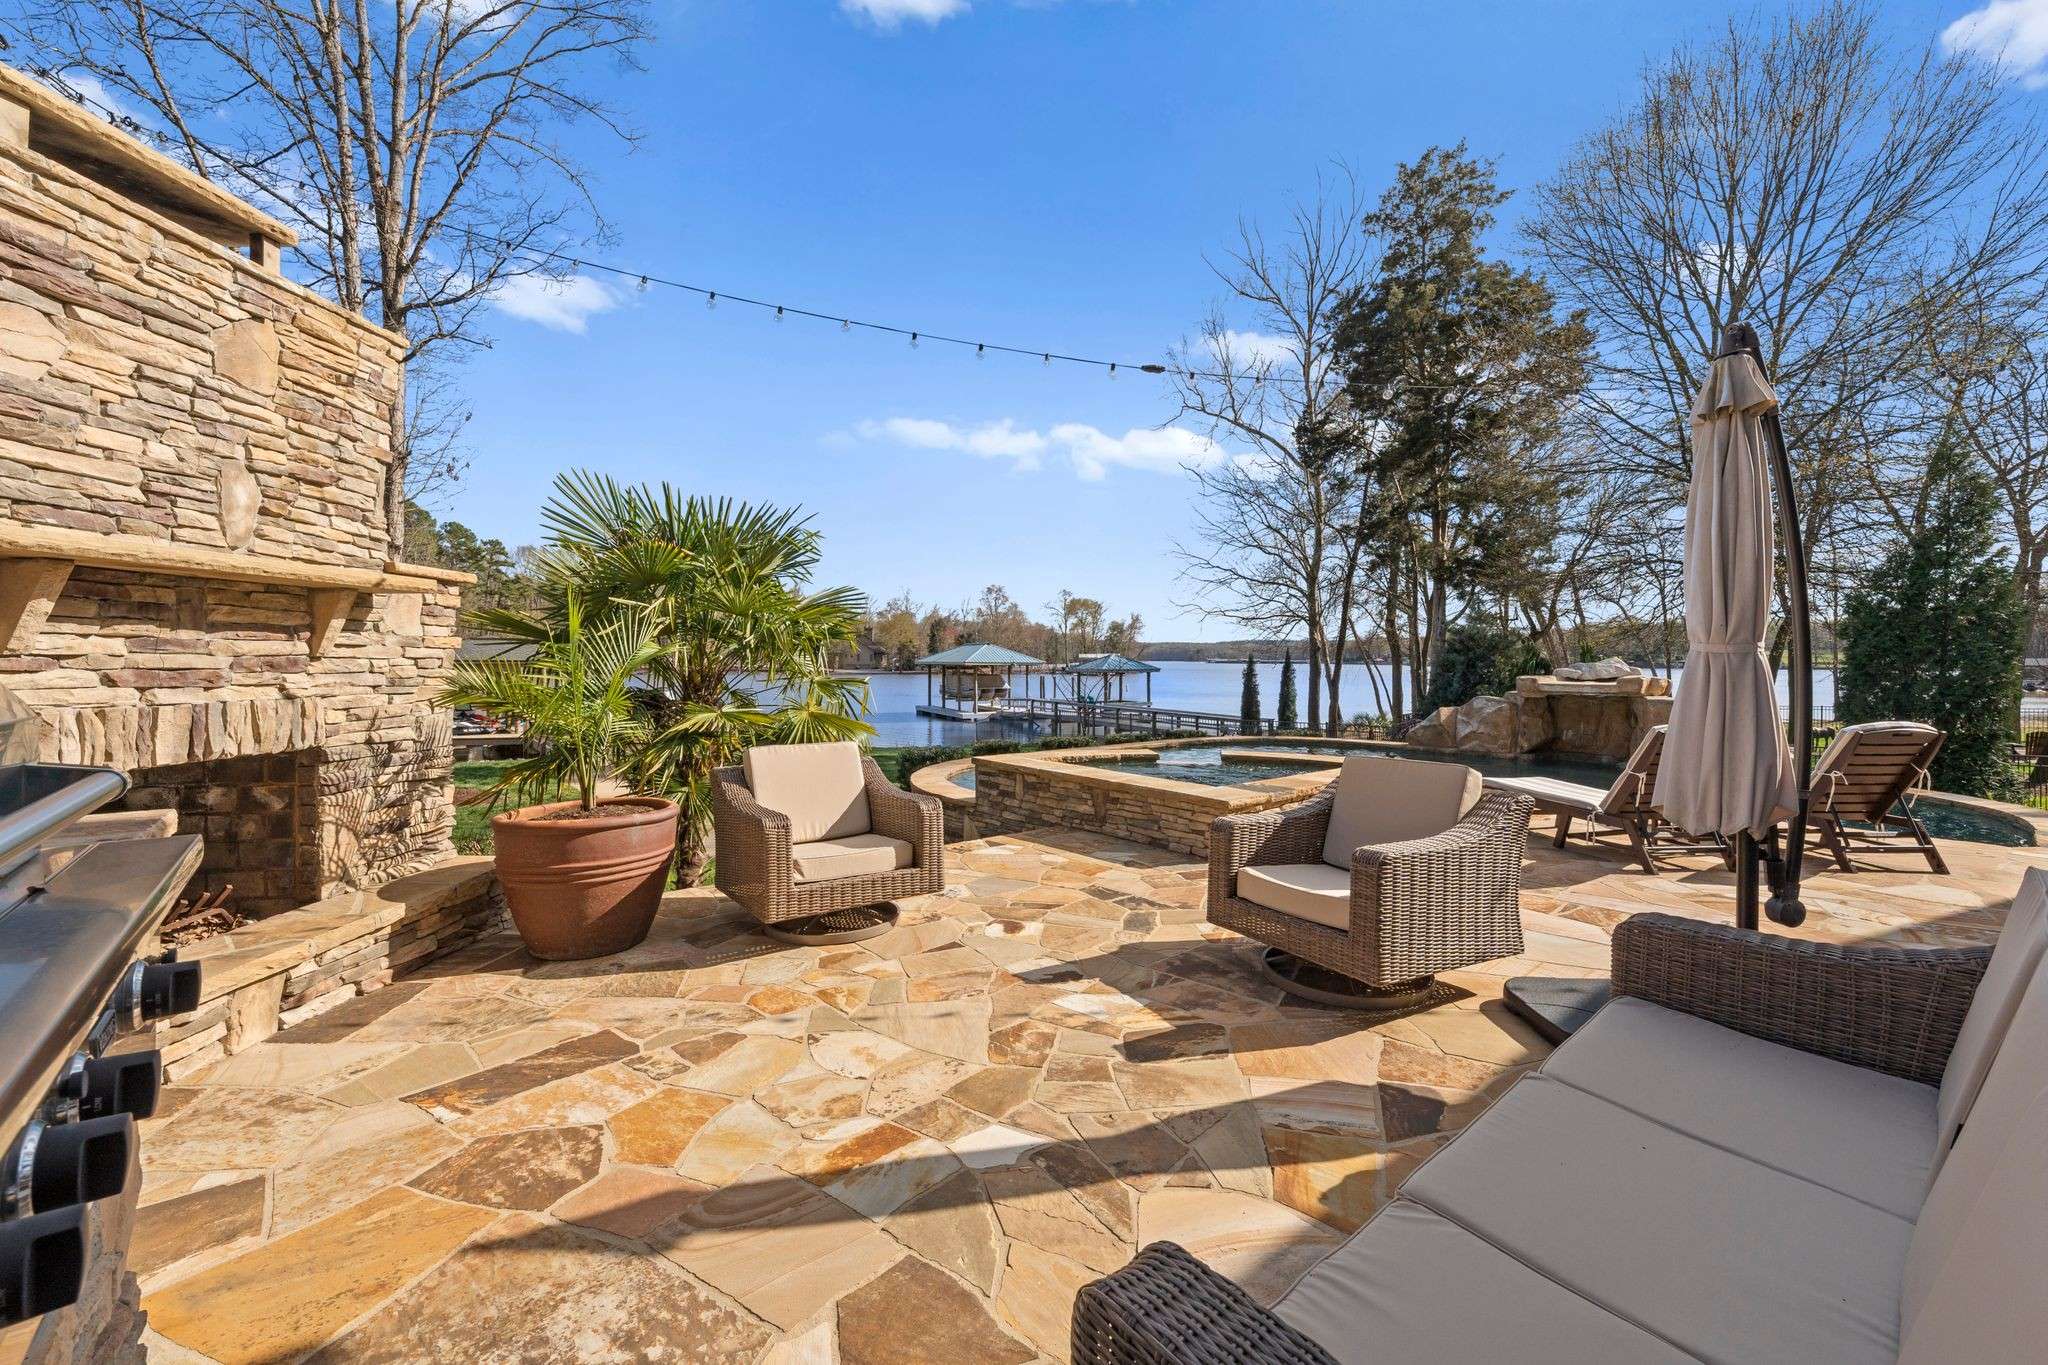 54 of 79. Exterior Day Time Photo - 846 Armstrong Rd - Showcasing Additional View of Outdoor Living and Entertaining area with unobstructed views of Lake Wylie